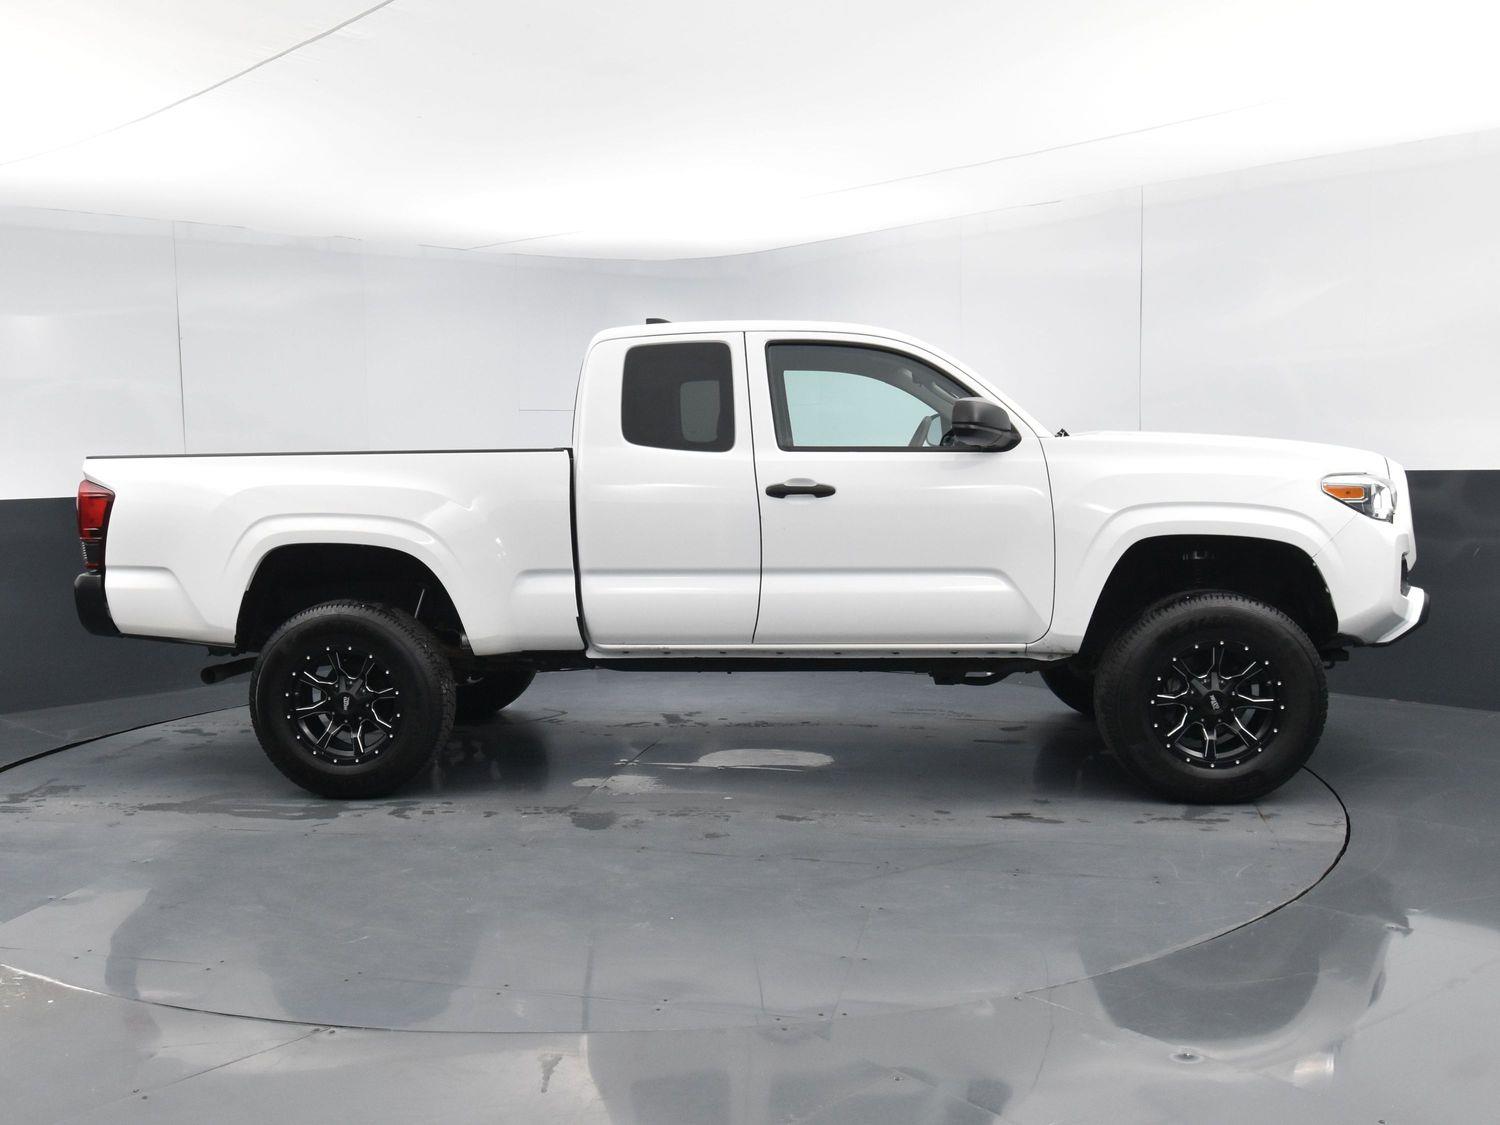 Used 2019 Toyota Tacoma 4WD SR Extended Cab Truck for sale in Grand Island NE